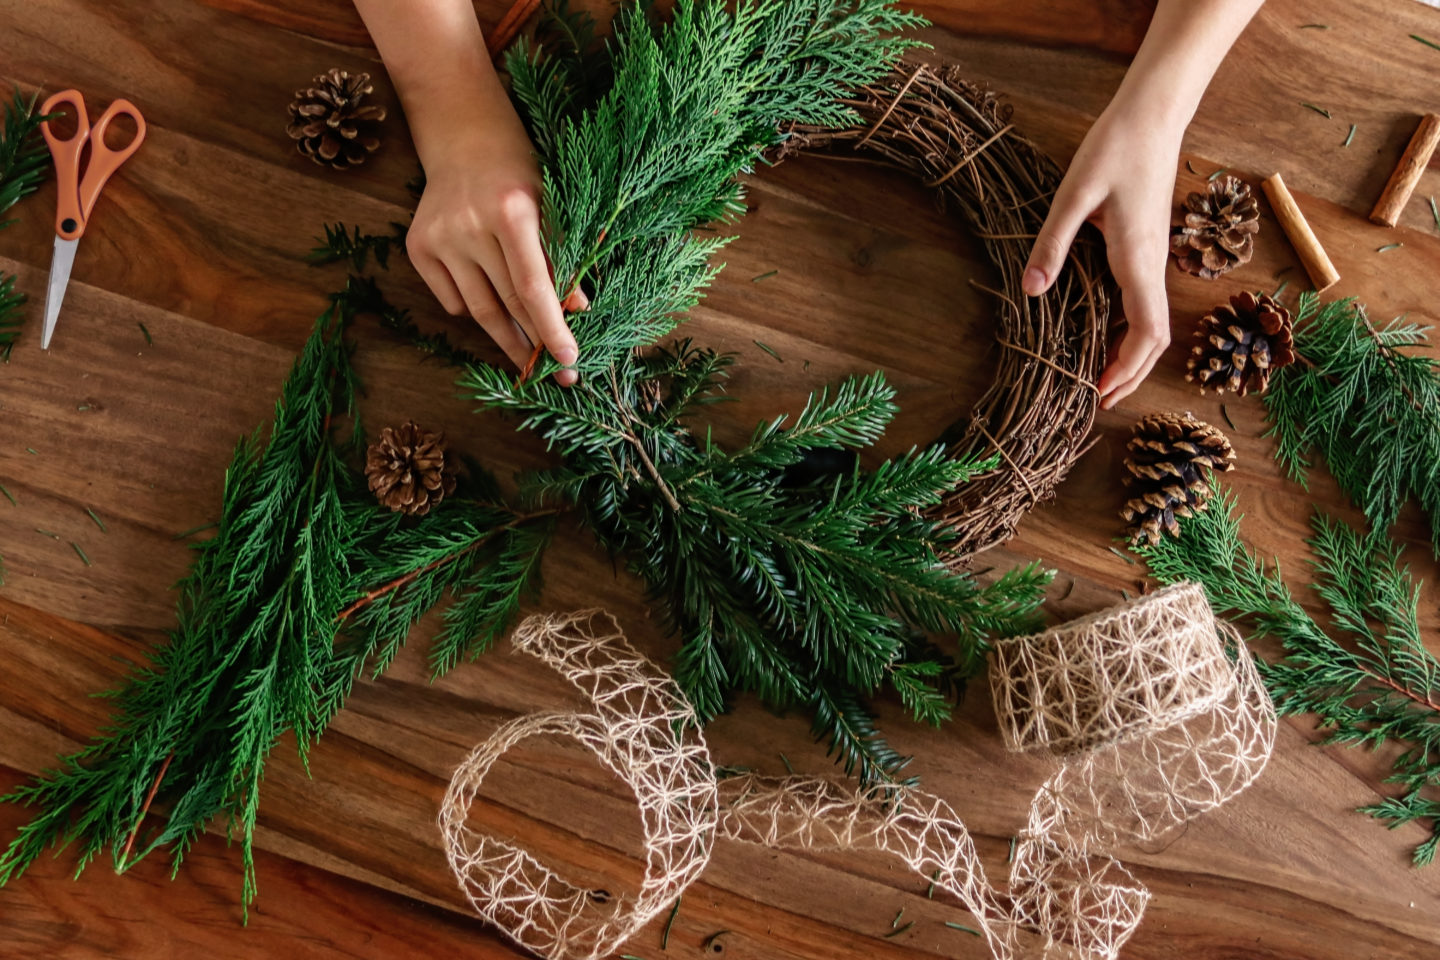 Overhead shot of hands making handmade Christmas wreath with twigs, pine cones, cinnamon sticks, yew and thuja branches and natural string. DIY home decor.